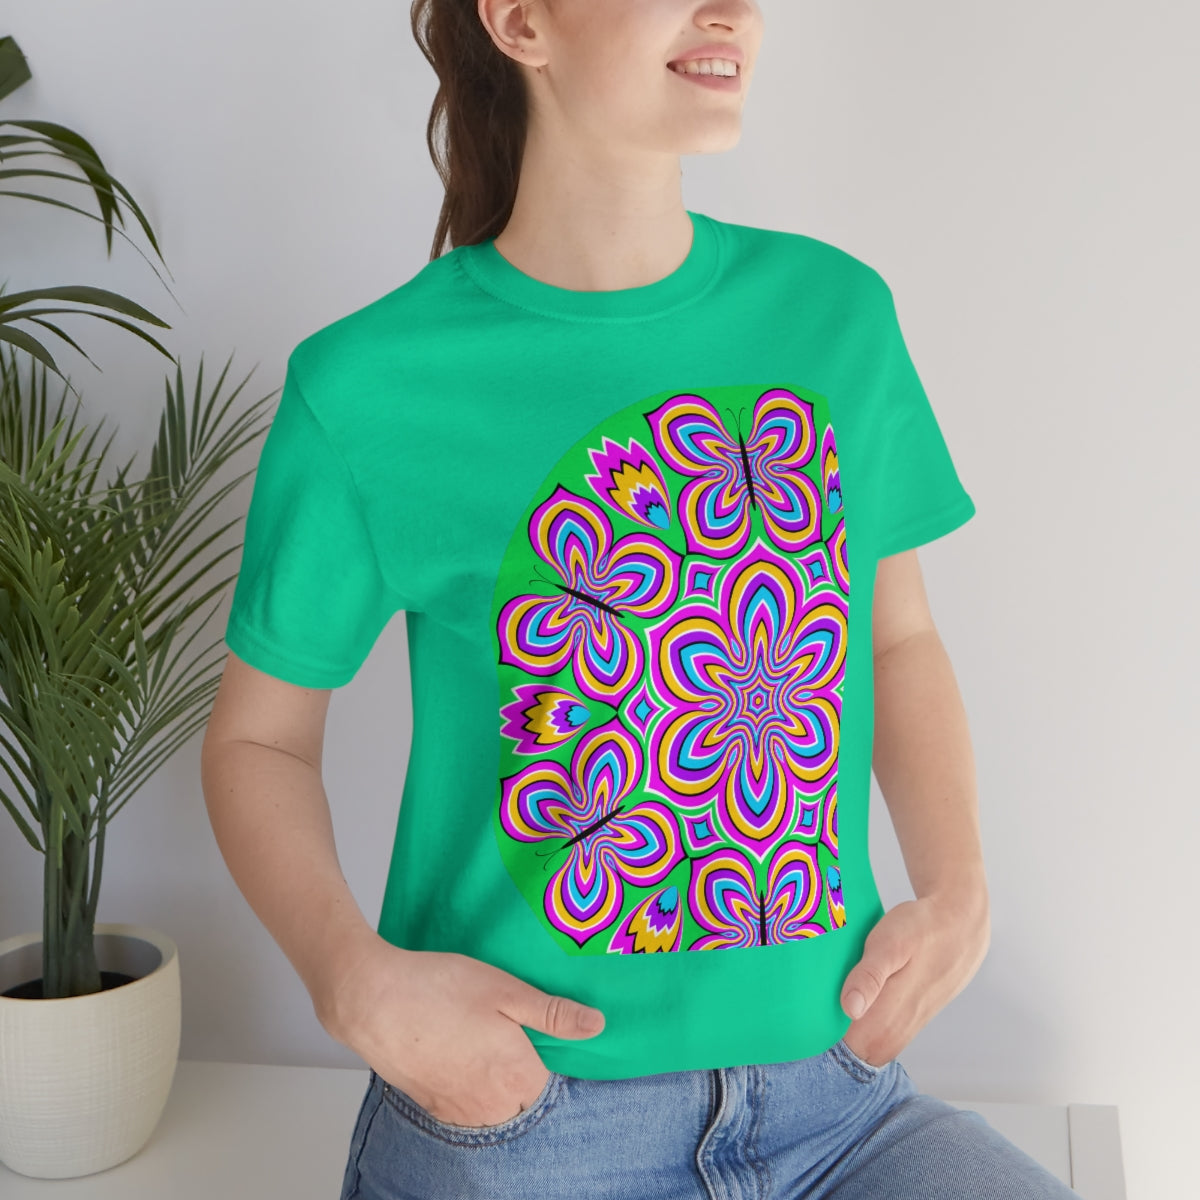 Unisex Jersey Short Sleeve Tee "Optical illusion Colorful flower and butterflies"